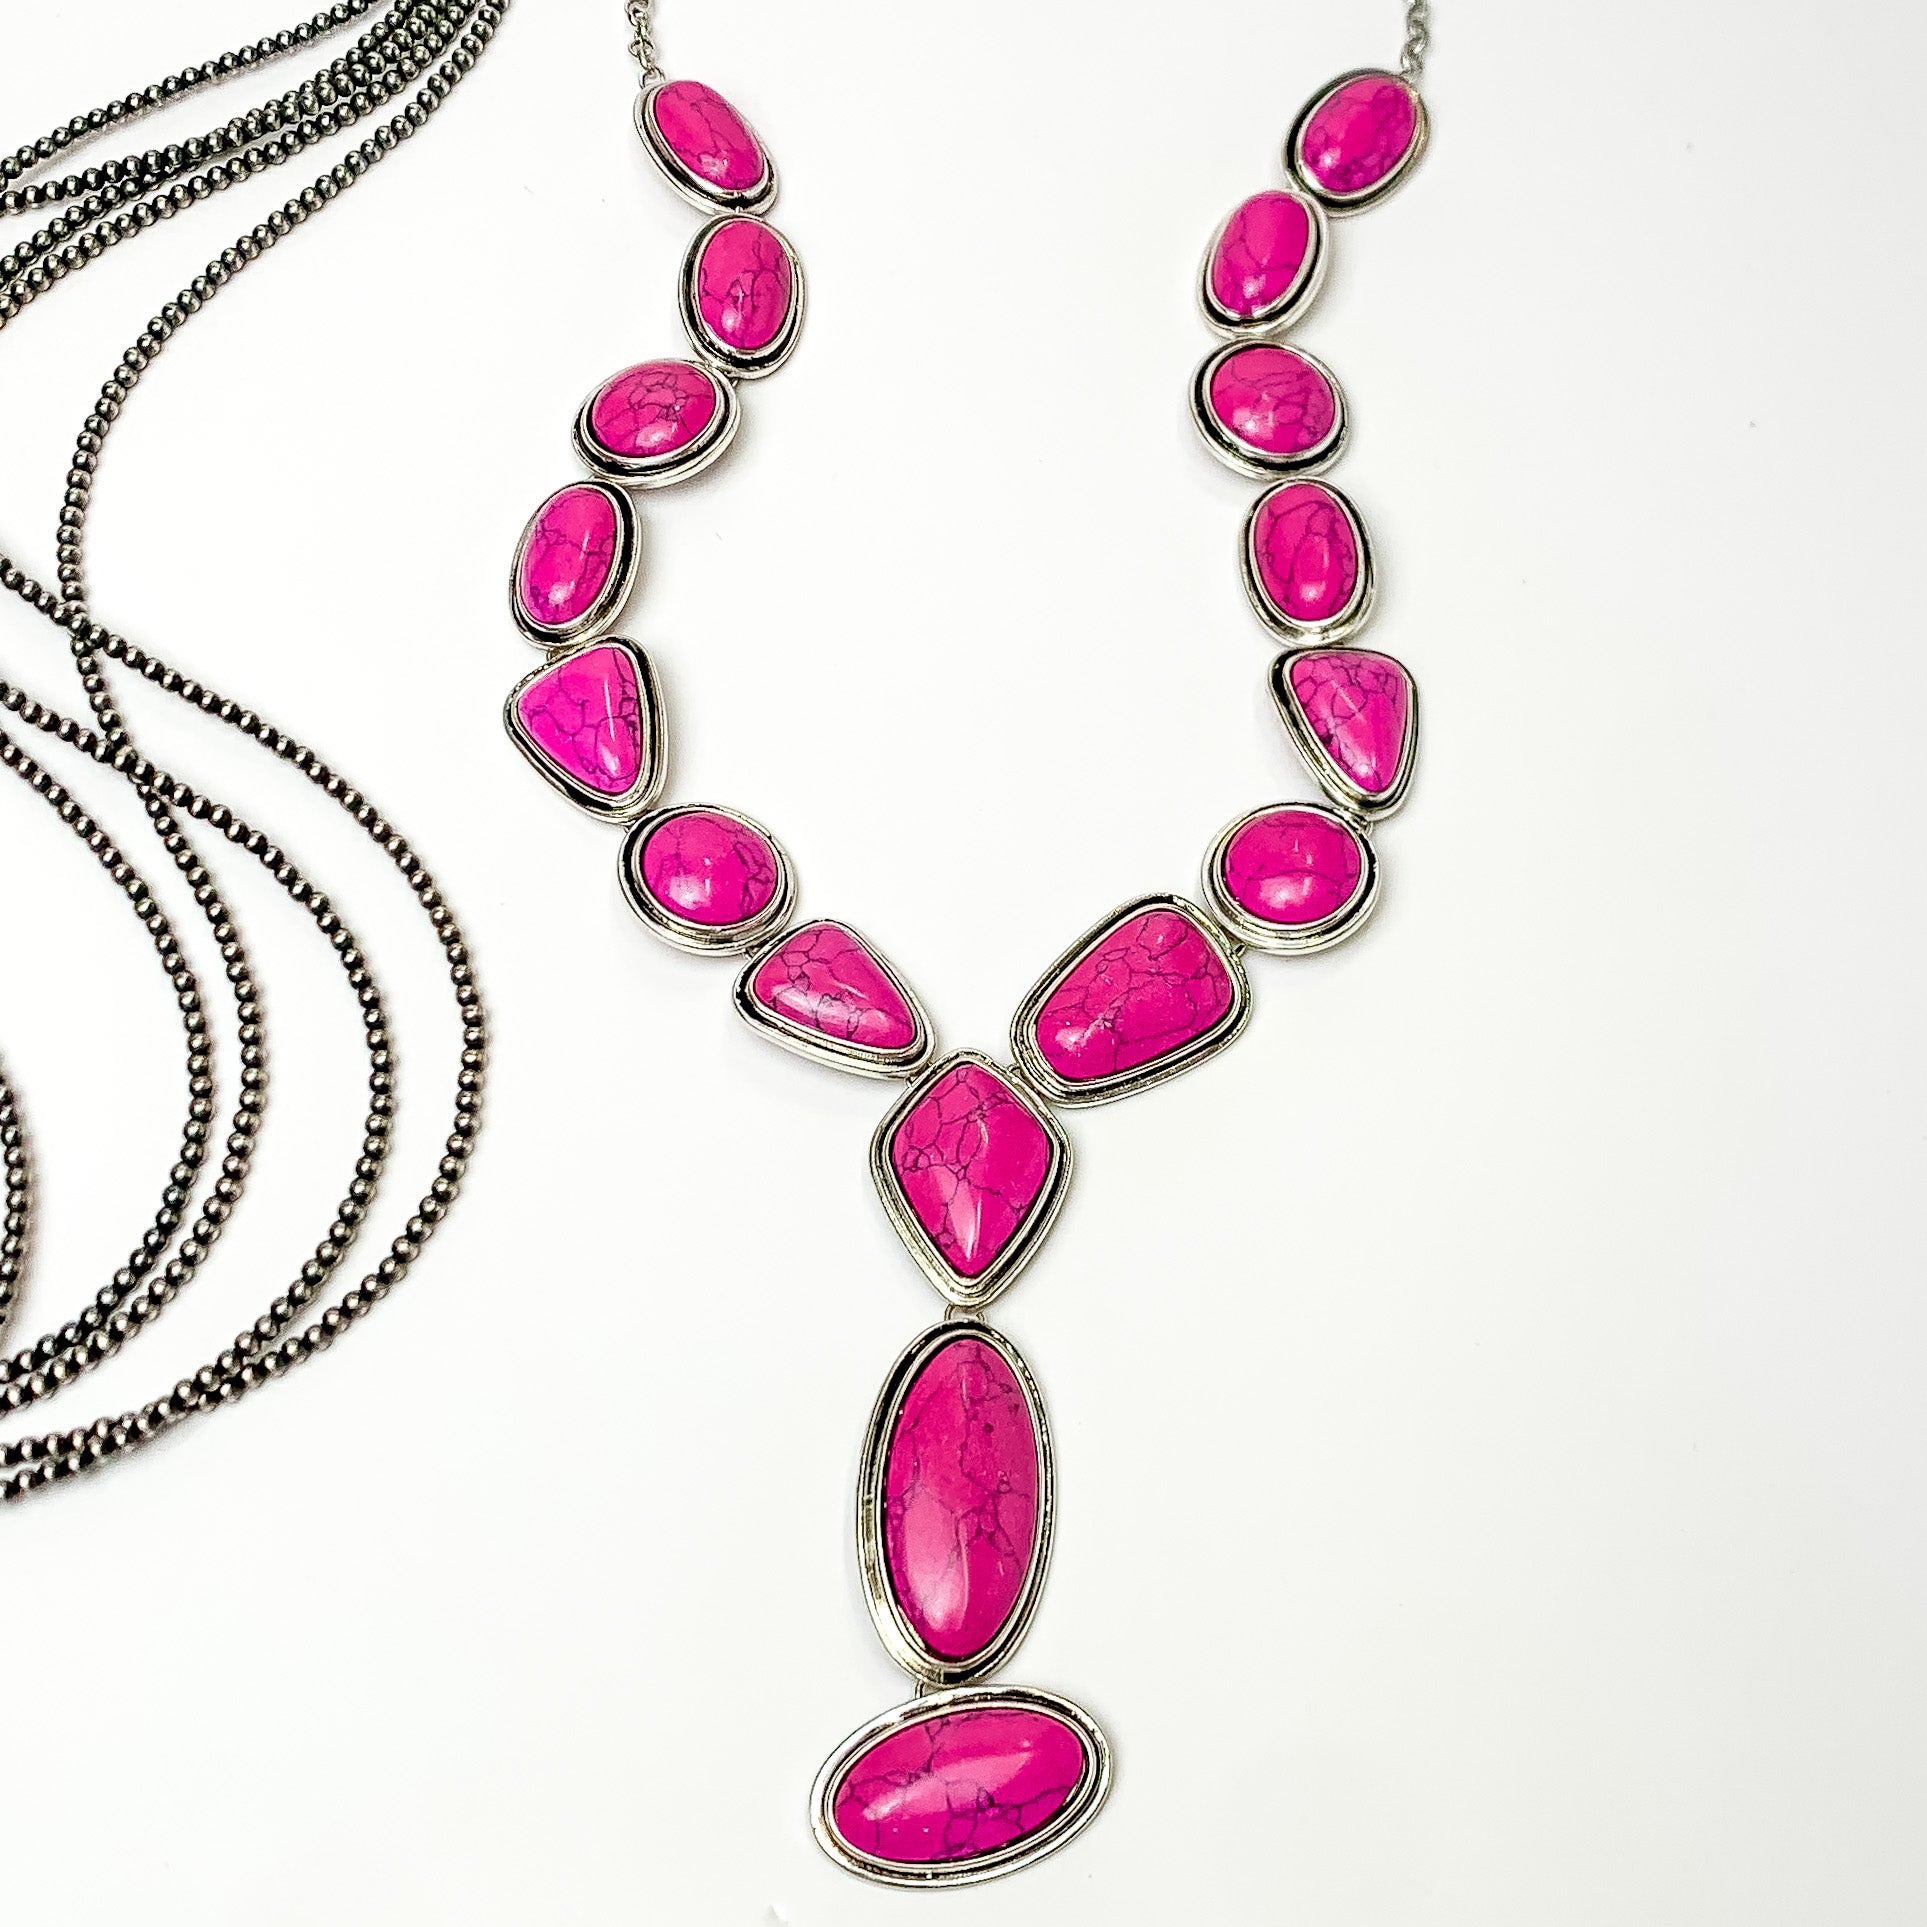 Multi stoned long necklace in pink with a dangling pink stones. Pictured on a white background with Navajo pearl stands.